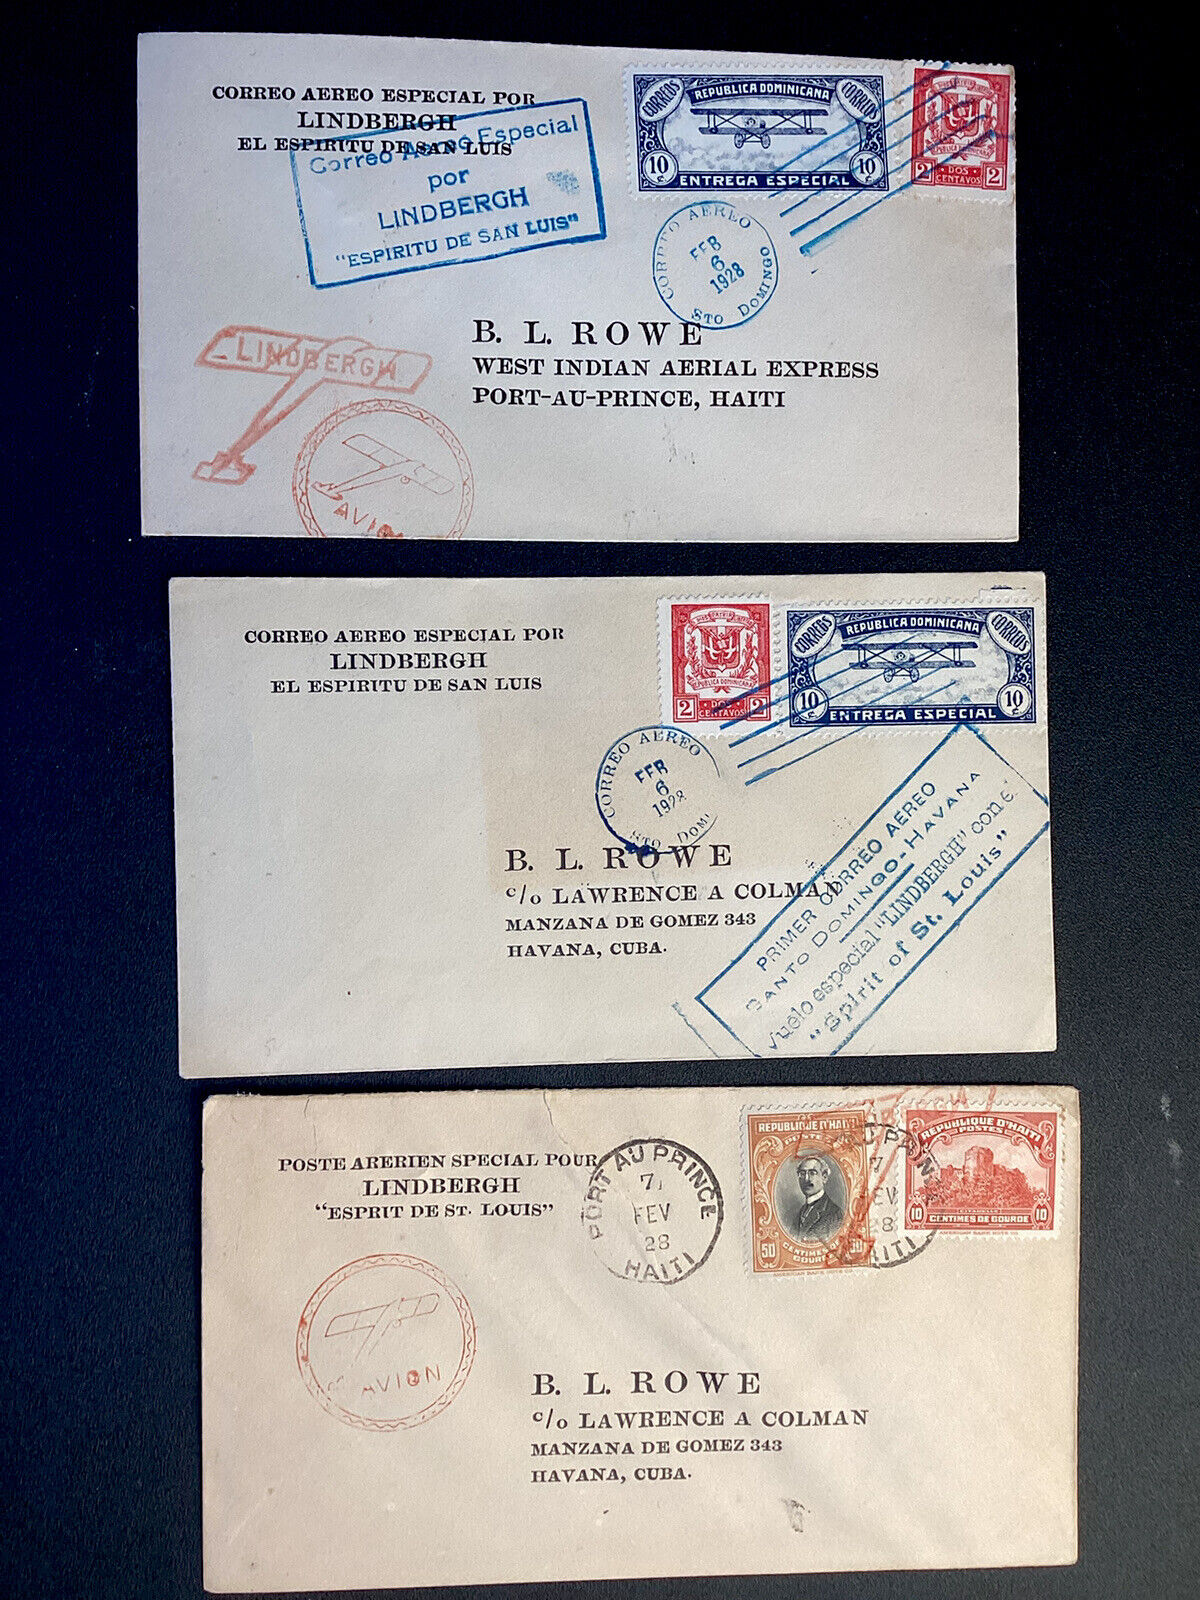 Lndbergh Flown ON THE SPIRIT of ST. LOUIS for WIA per AAMC 3 cover complete set